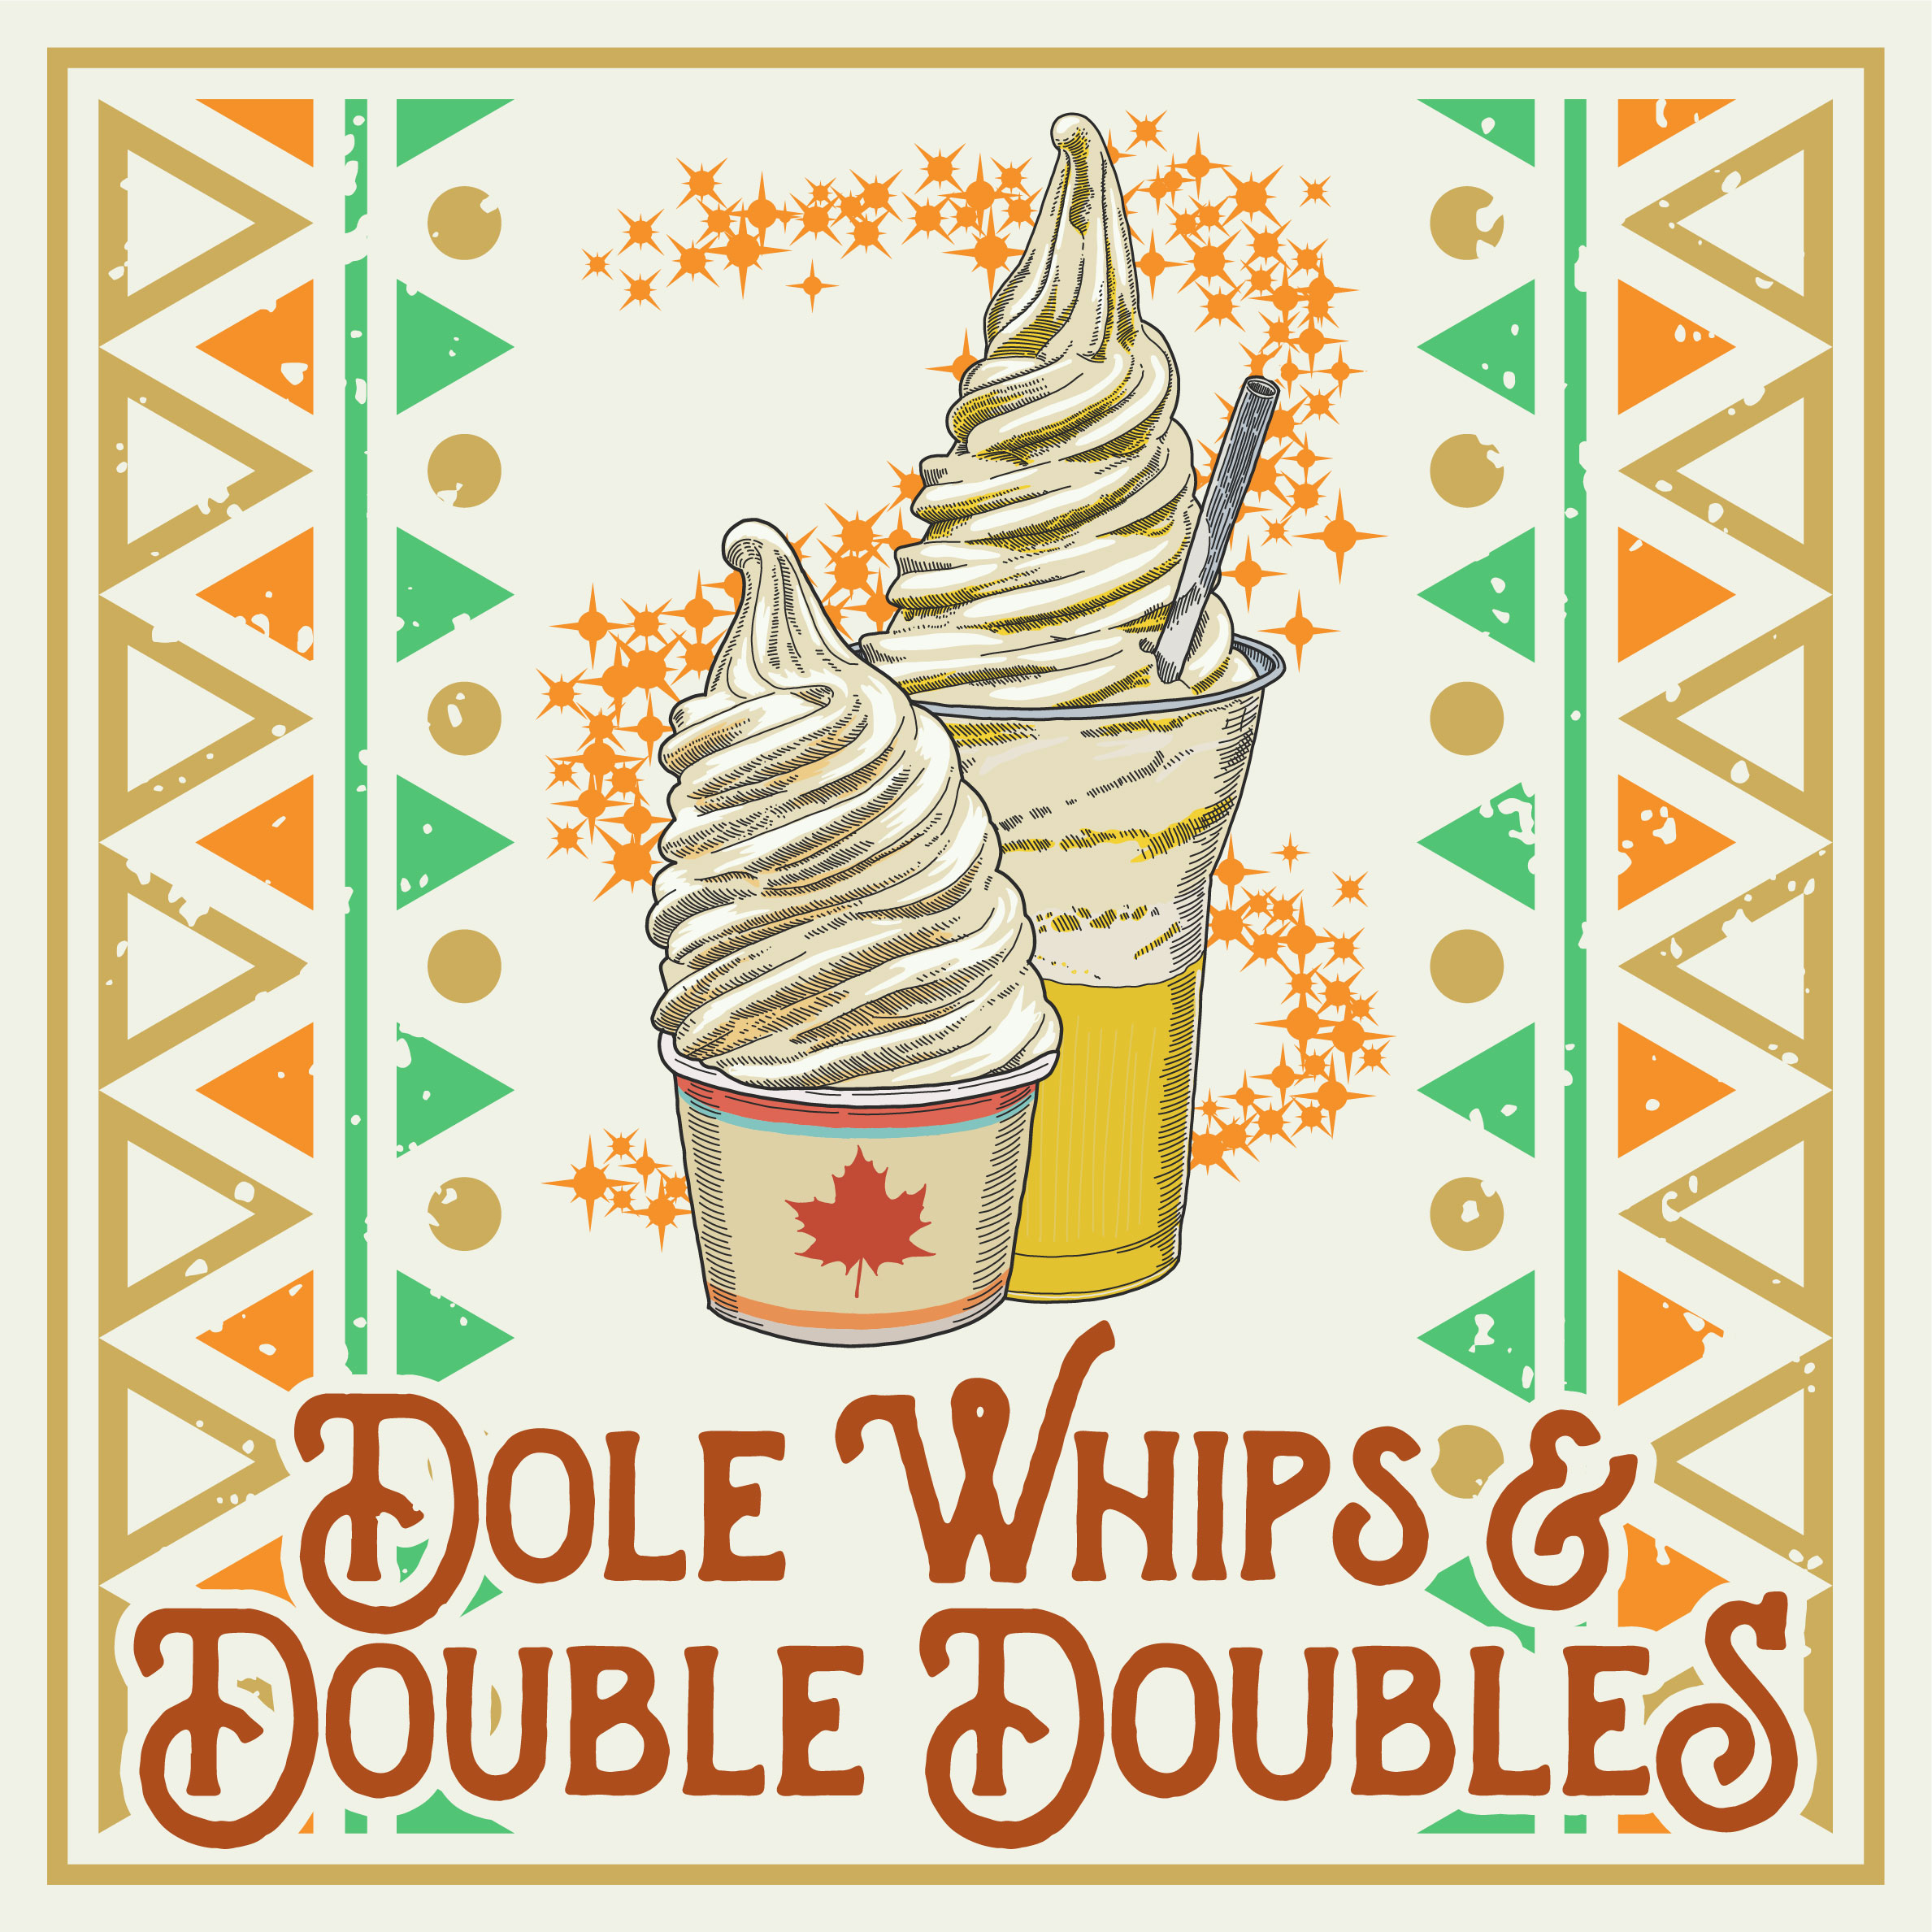 Dole Whips & Double Doubles